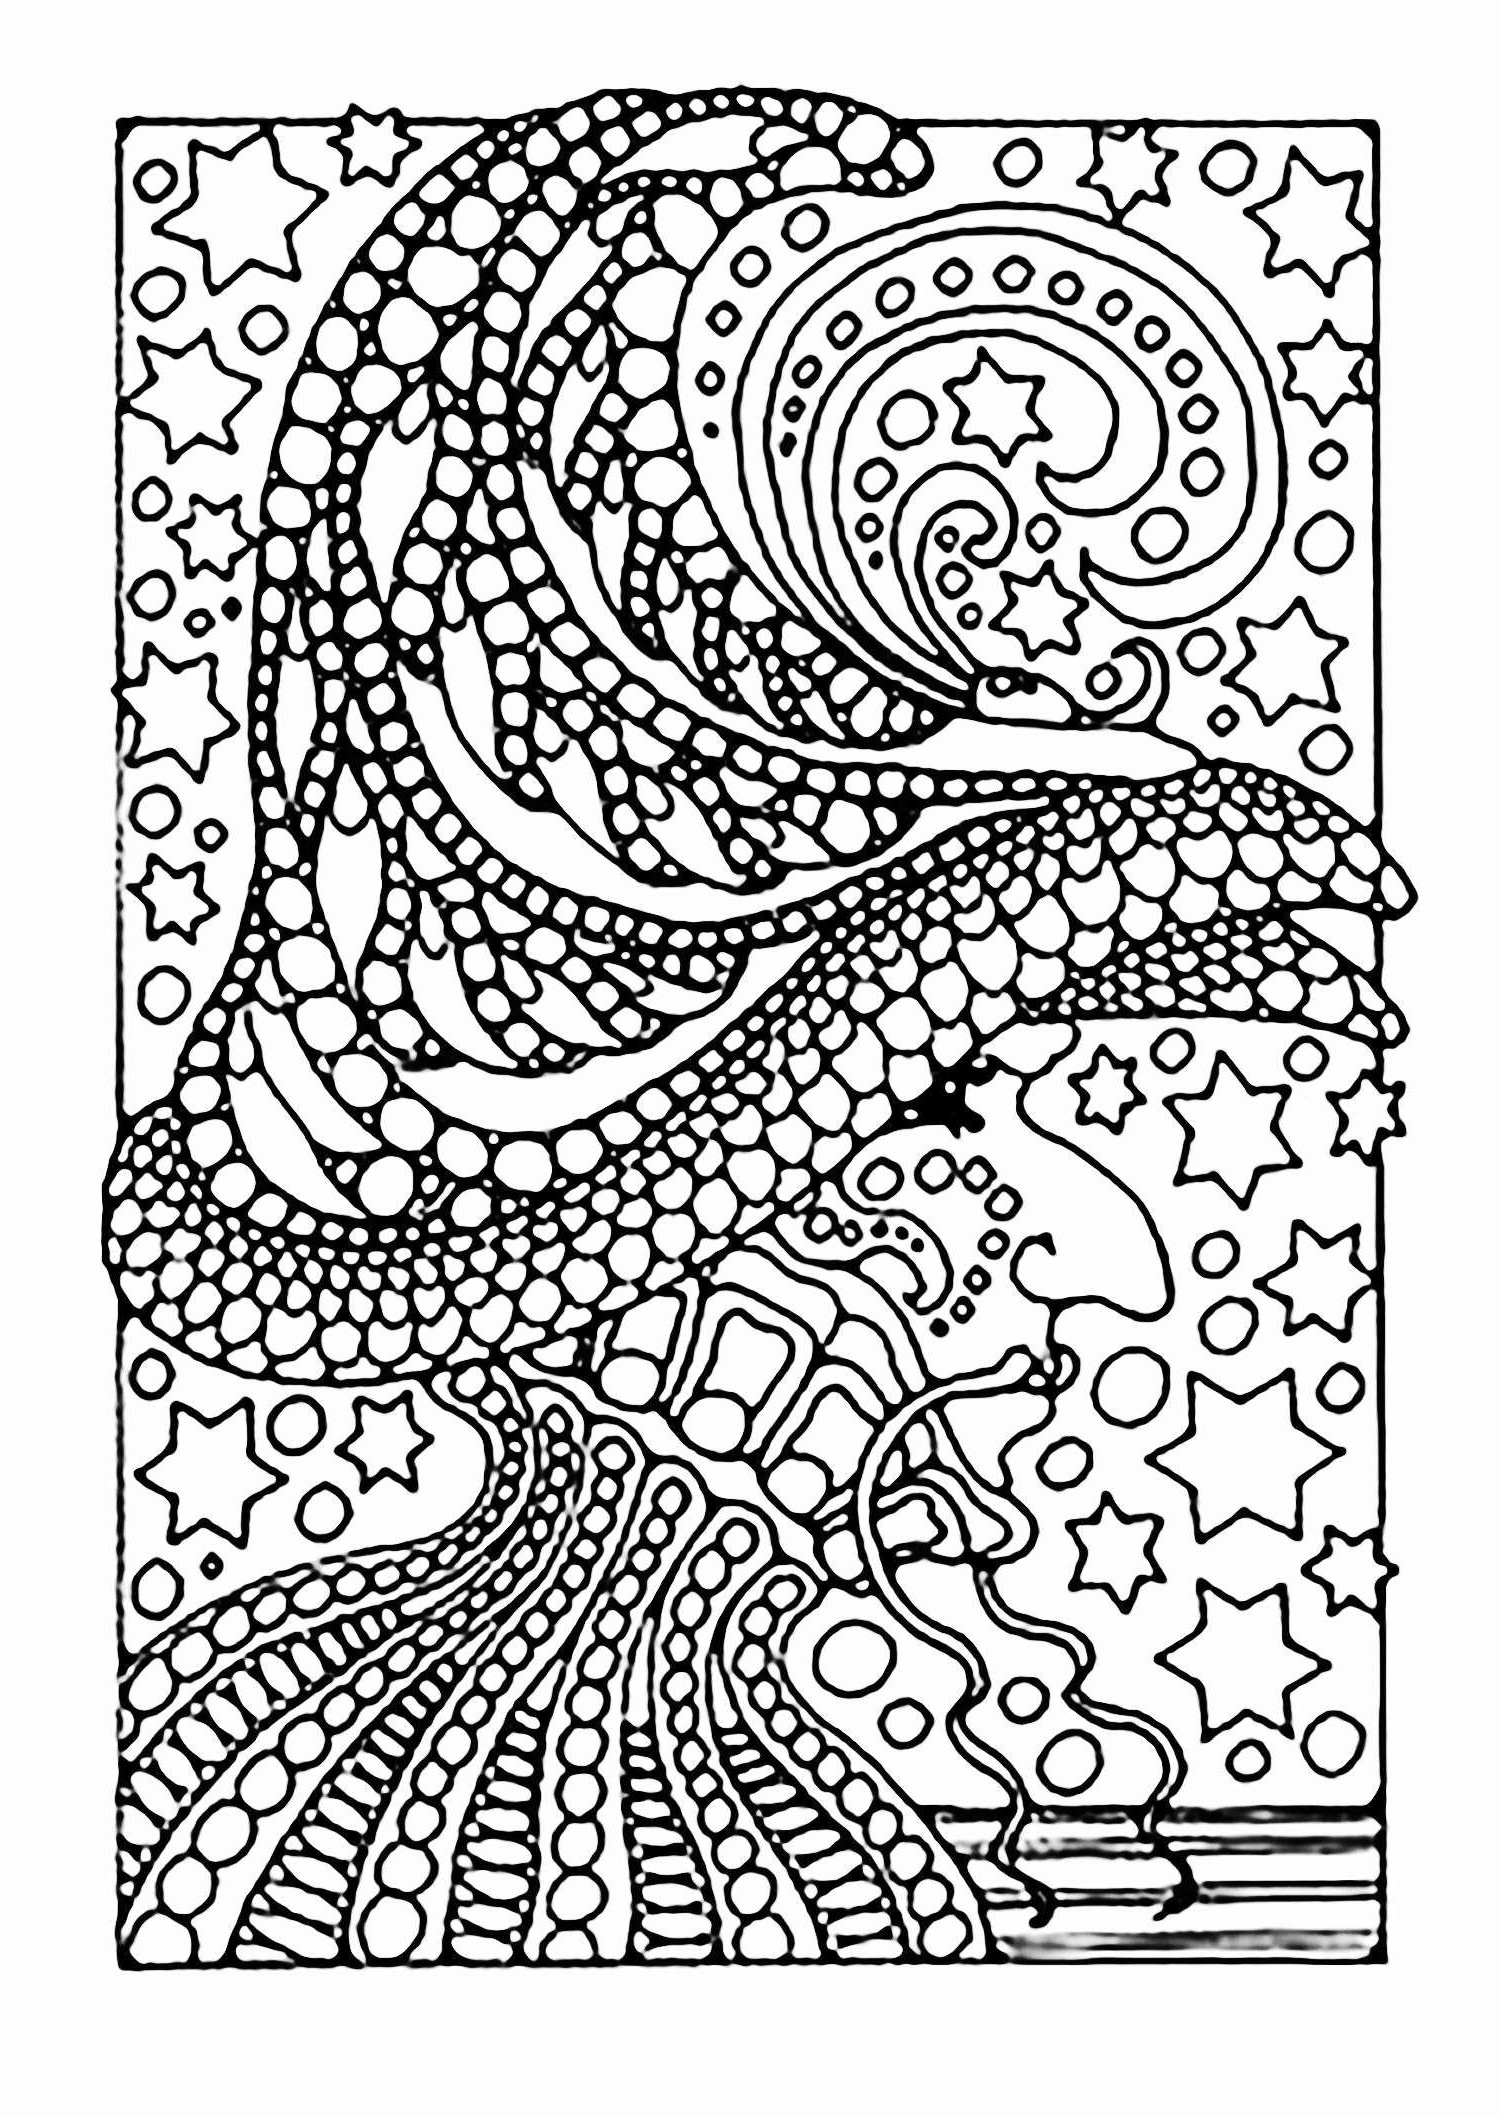 Halloween Kinder Schön 22 Inspirational S Chinchilla Coloring Page